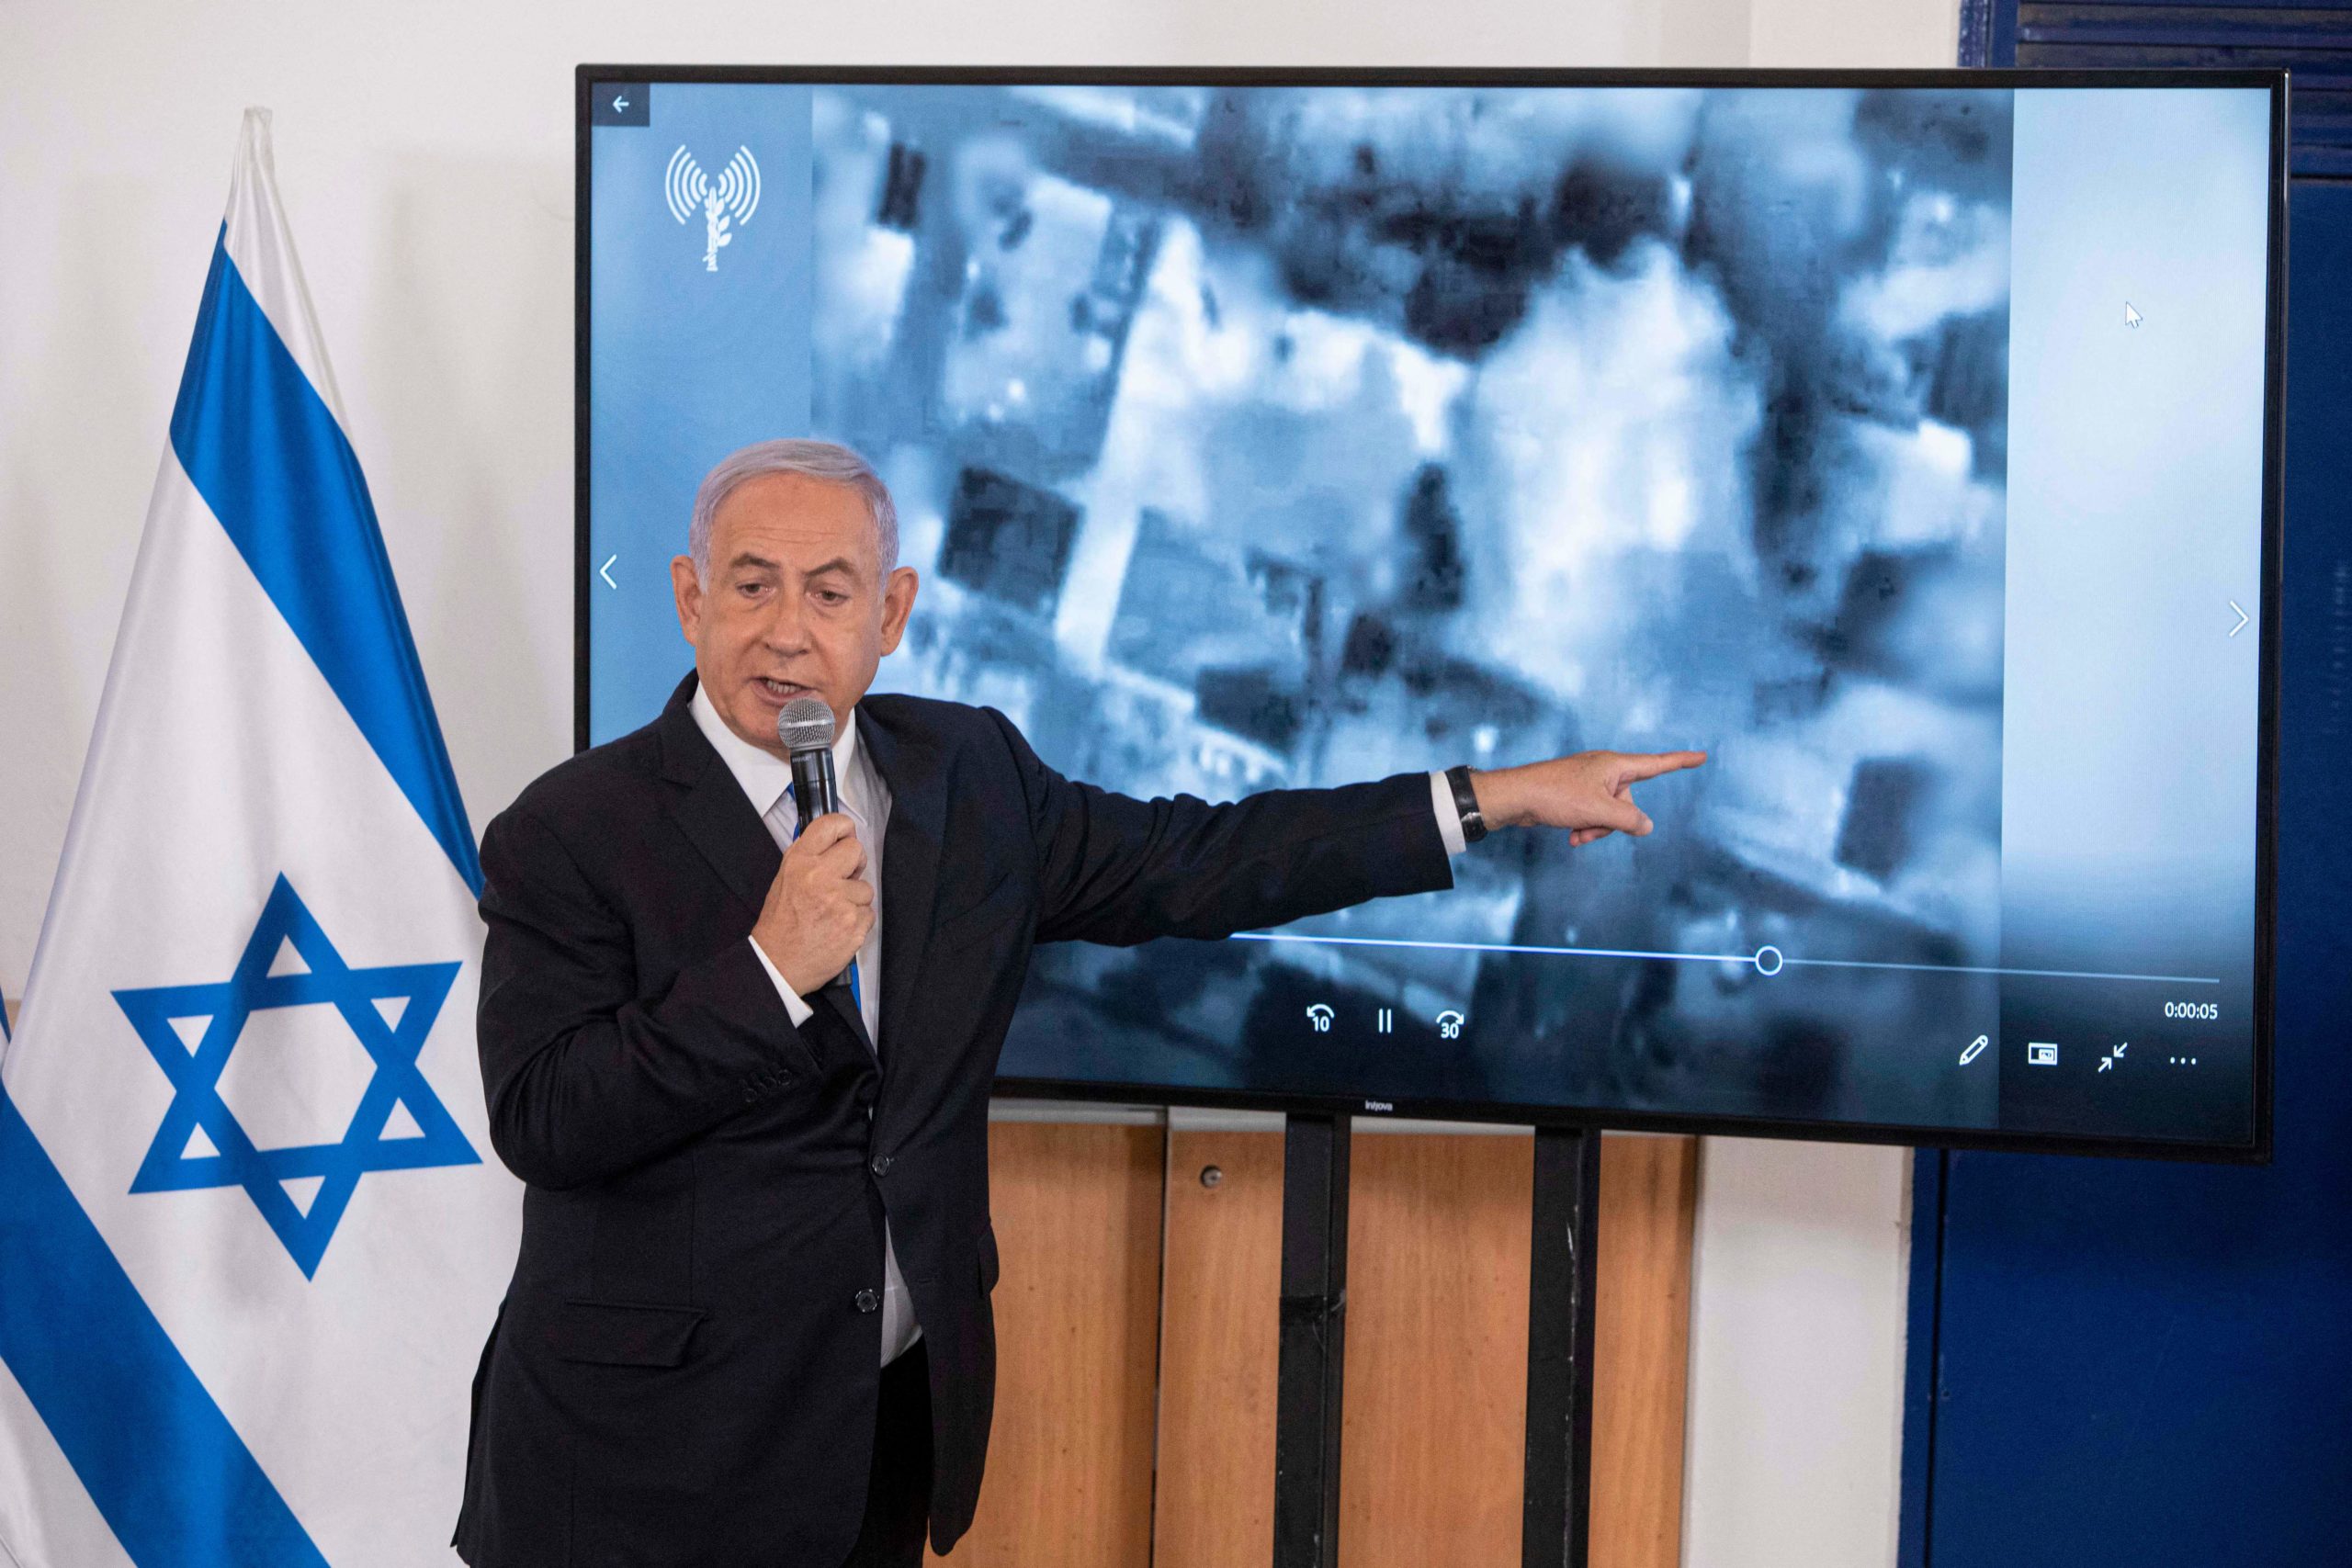 Israeli Prime Minister Benjamin Netanyahu gestures as he shows a slideshow during a briefing to ambassadors to Israel at the Hakirya military base in Tel Aviv, Israel, Wednesday, May 19, 2021. (SEBASTIAN SCHEINER/POOL/AFP via Getty Images)